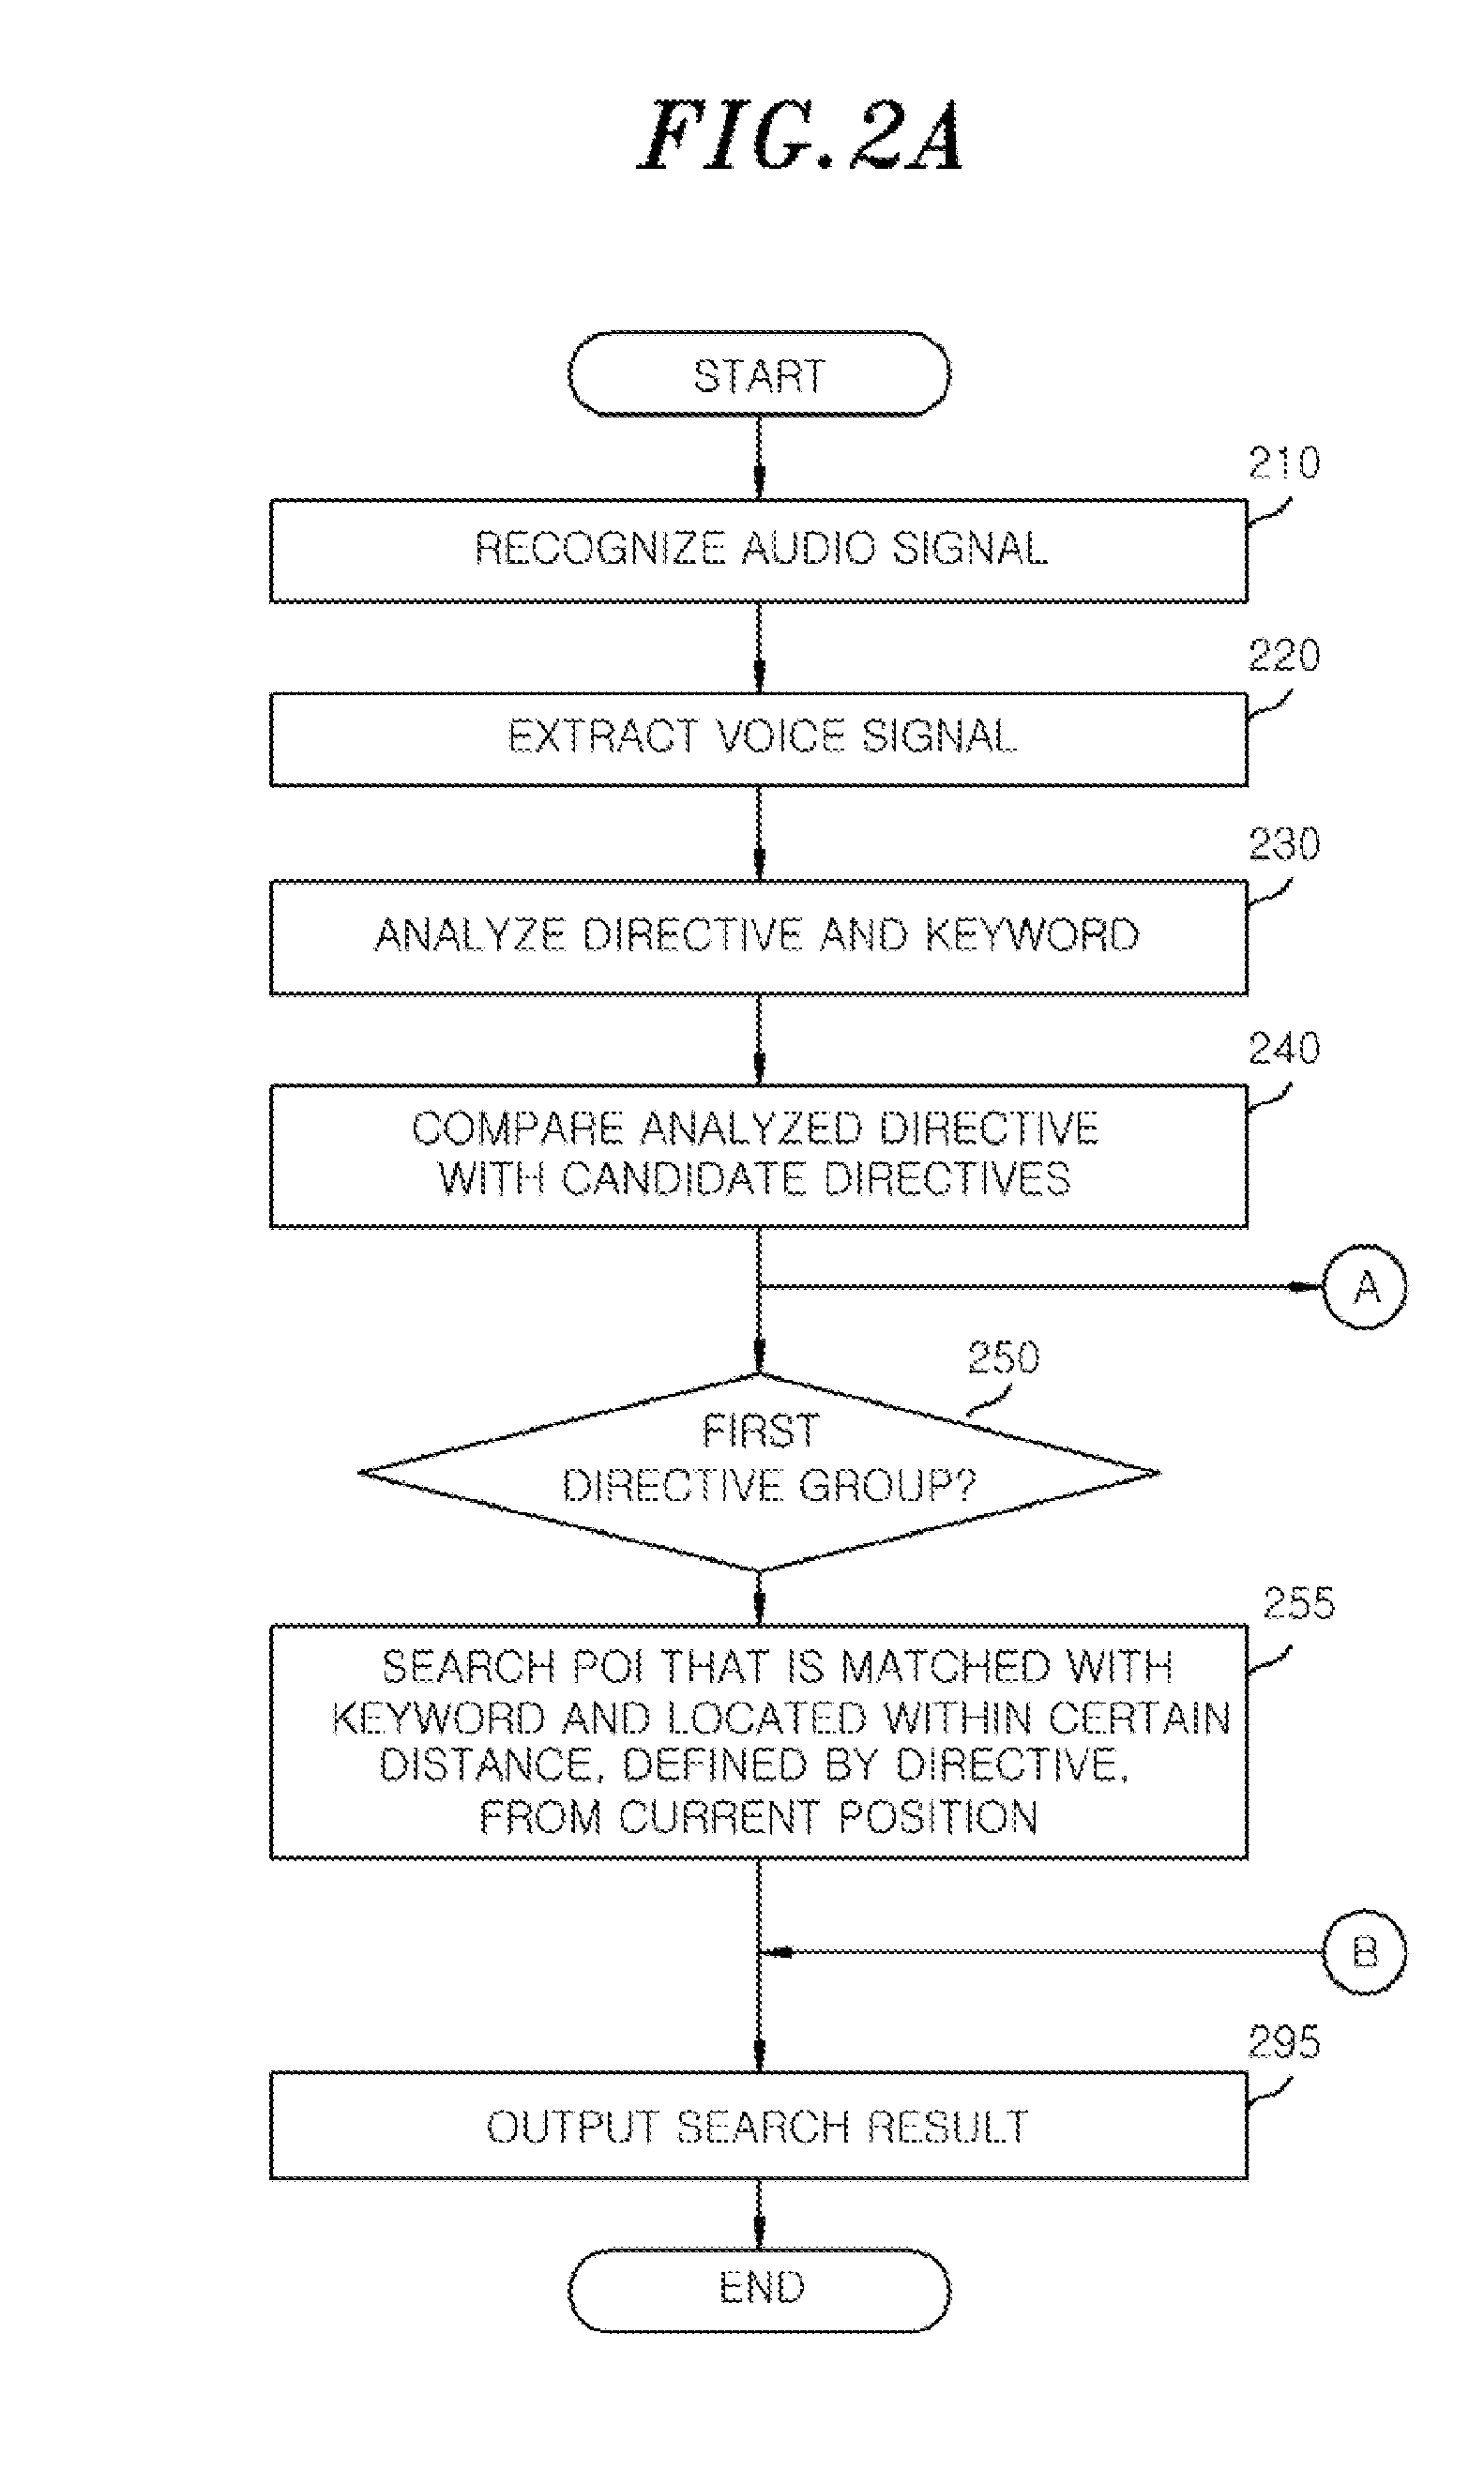 Route guidance apparatus and method with voice recognition